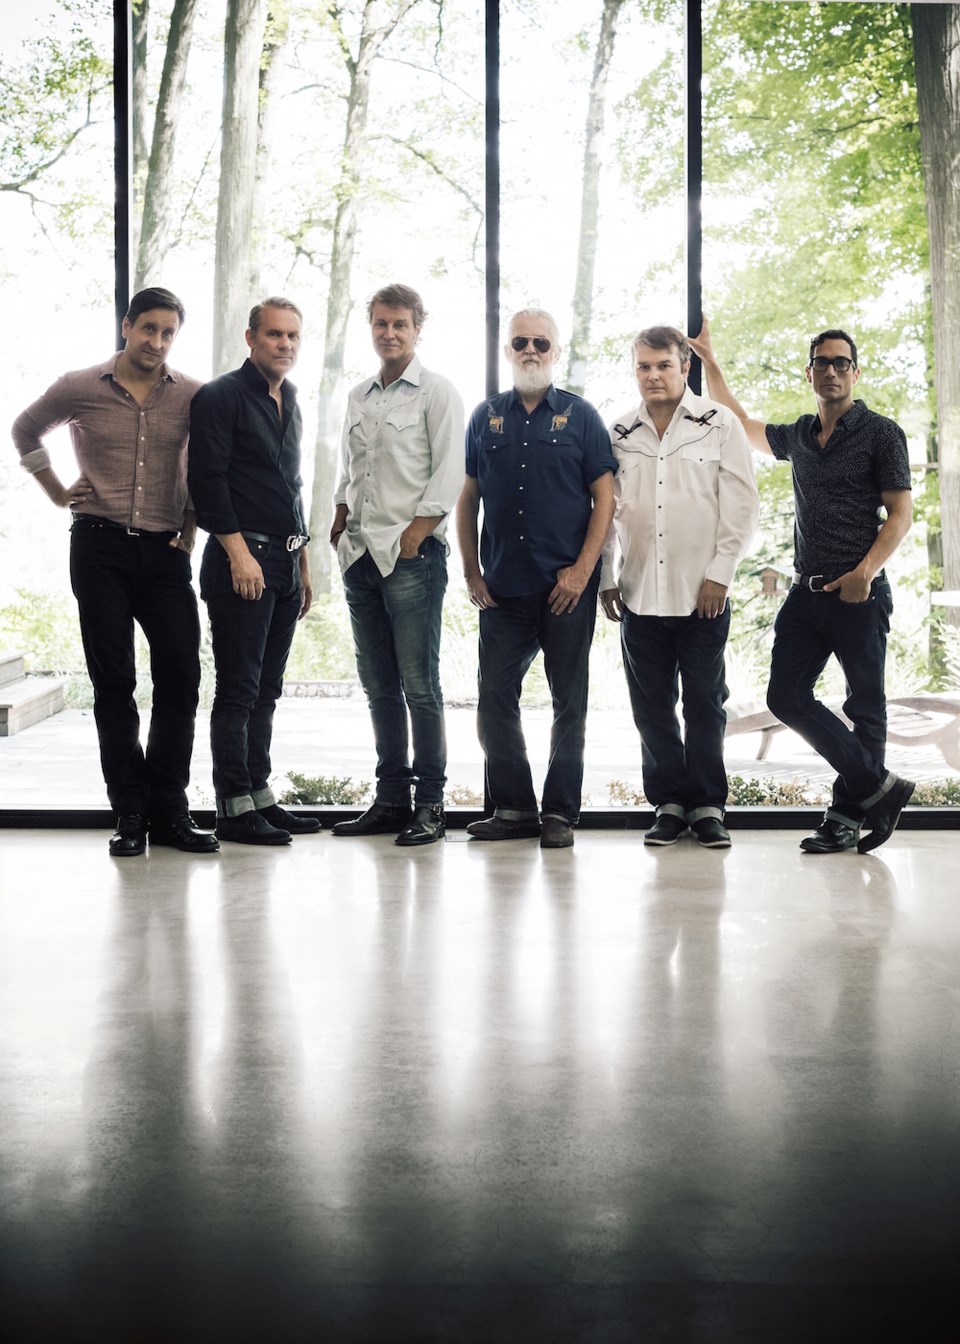 Canadian rock country group Blue Rodeo will be in Estevan on Jan. 15 as part of their tour to promot